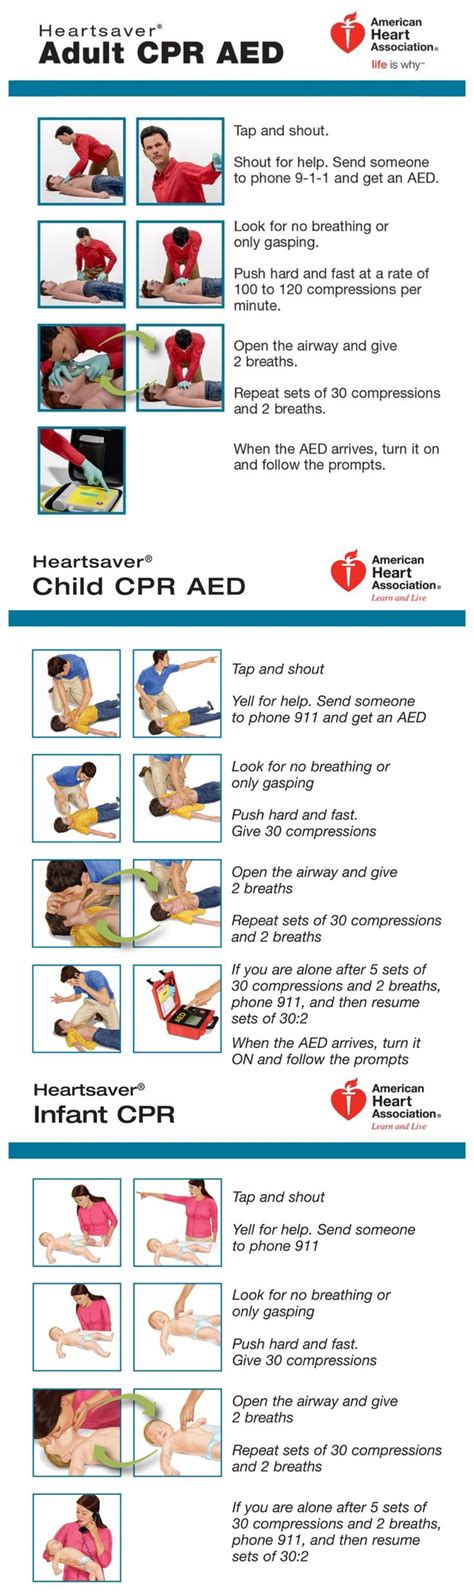 Heartsaver Aed Adult Child And Infant Cpr Training Emergency